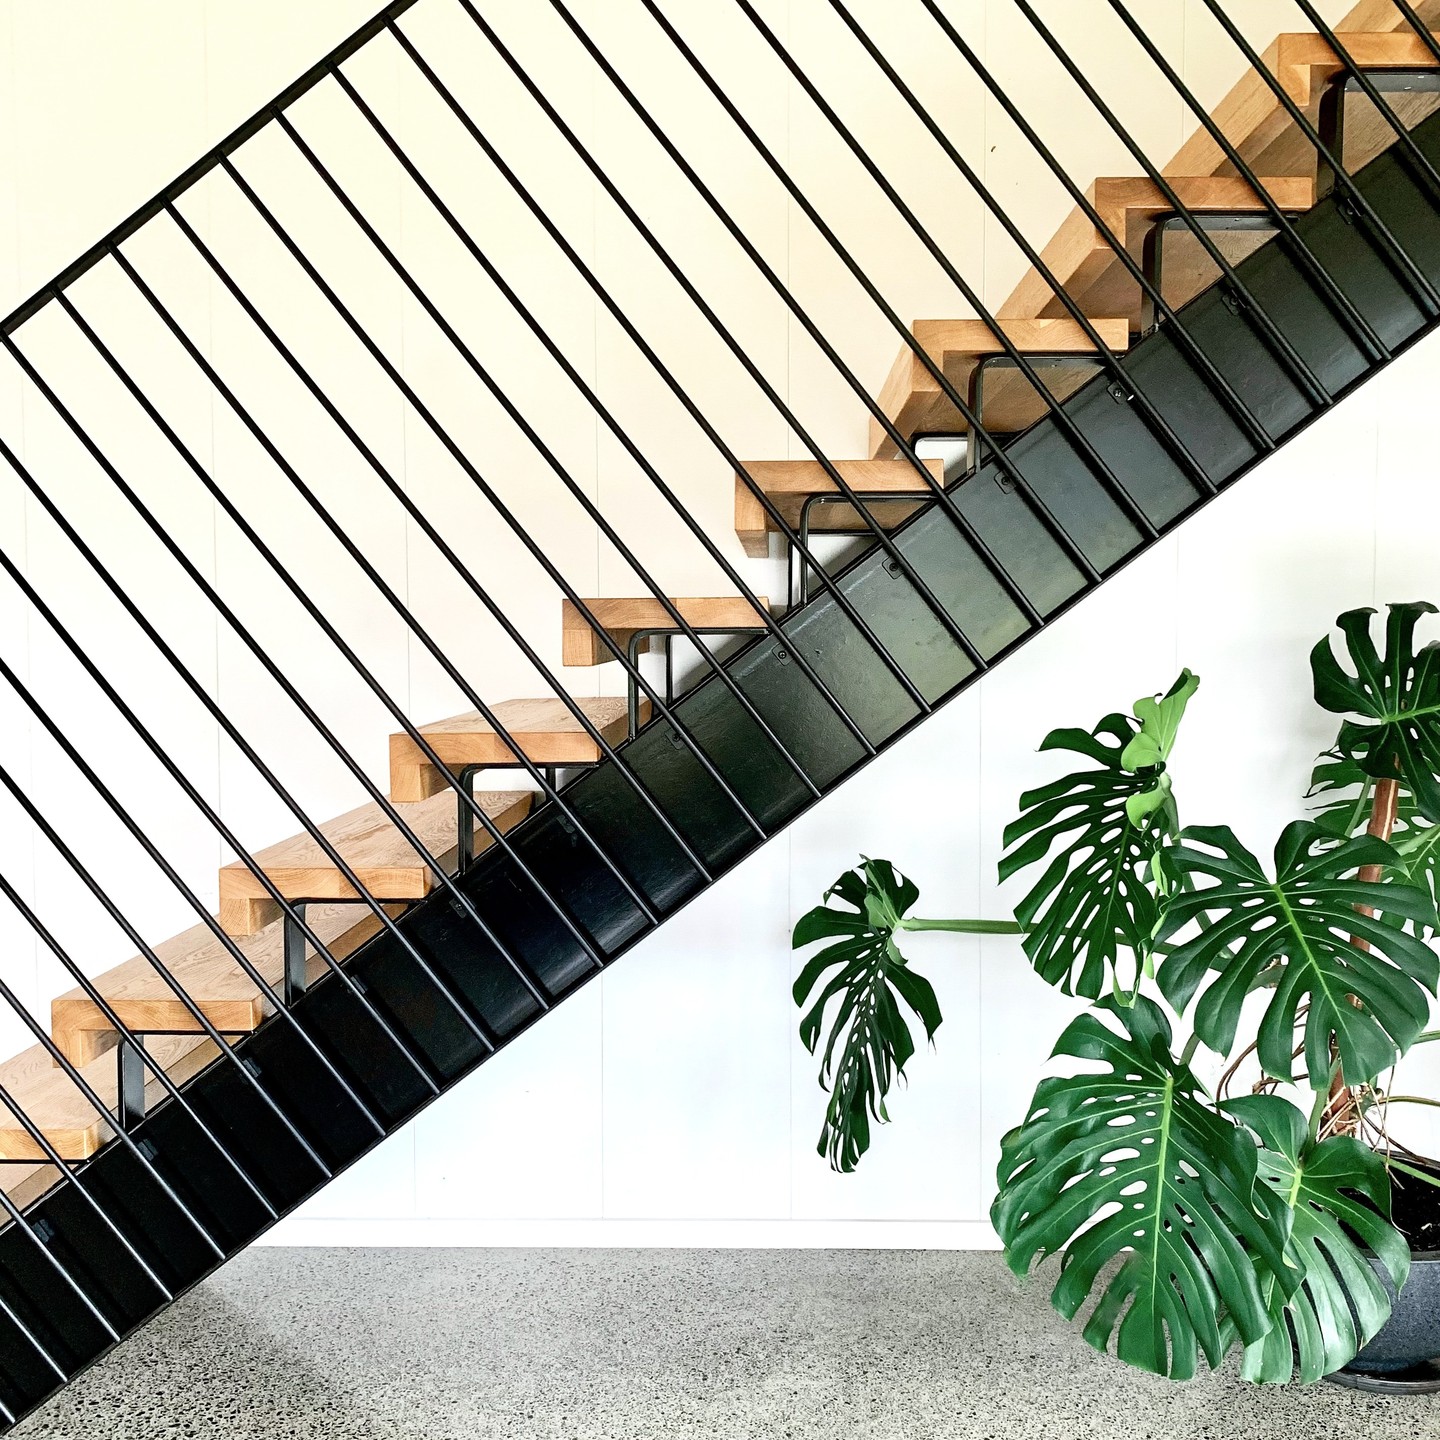 When designing this staircase we specified for the balustrade to run perpendicular to the stringer. In doing so it has created personality, movement and a point of difference to this beautiful oak and steel staircase

Design by: @newtonandkay

#interiordesign #interiordesigns #interiordesigner #nzinteriordesign #interiordesignnz #nzinteriors #interior #moderninterior #interiorstyling #newtonandkay #staircase #staircasedesign #oak #oakstairs #oakstaircase #timberstaircase #steelstairs #steelstaircase #metalstaircase #oakandsteel #steelandwood #modernstairs #modernstaircase #homedesign #design #designnz #bayofislands #northland